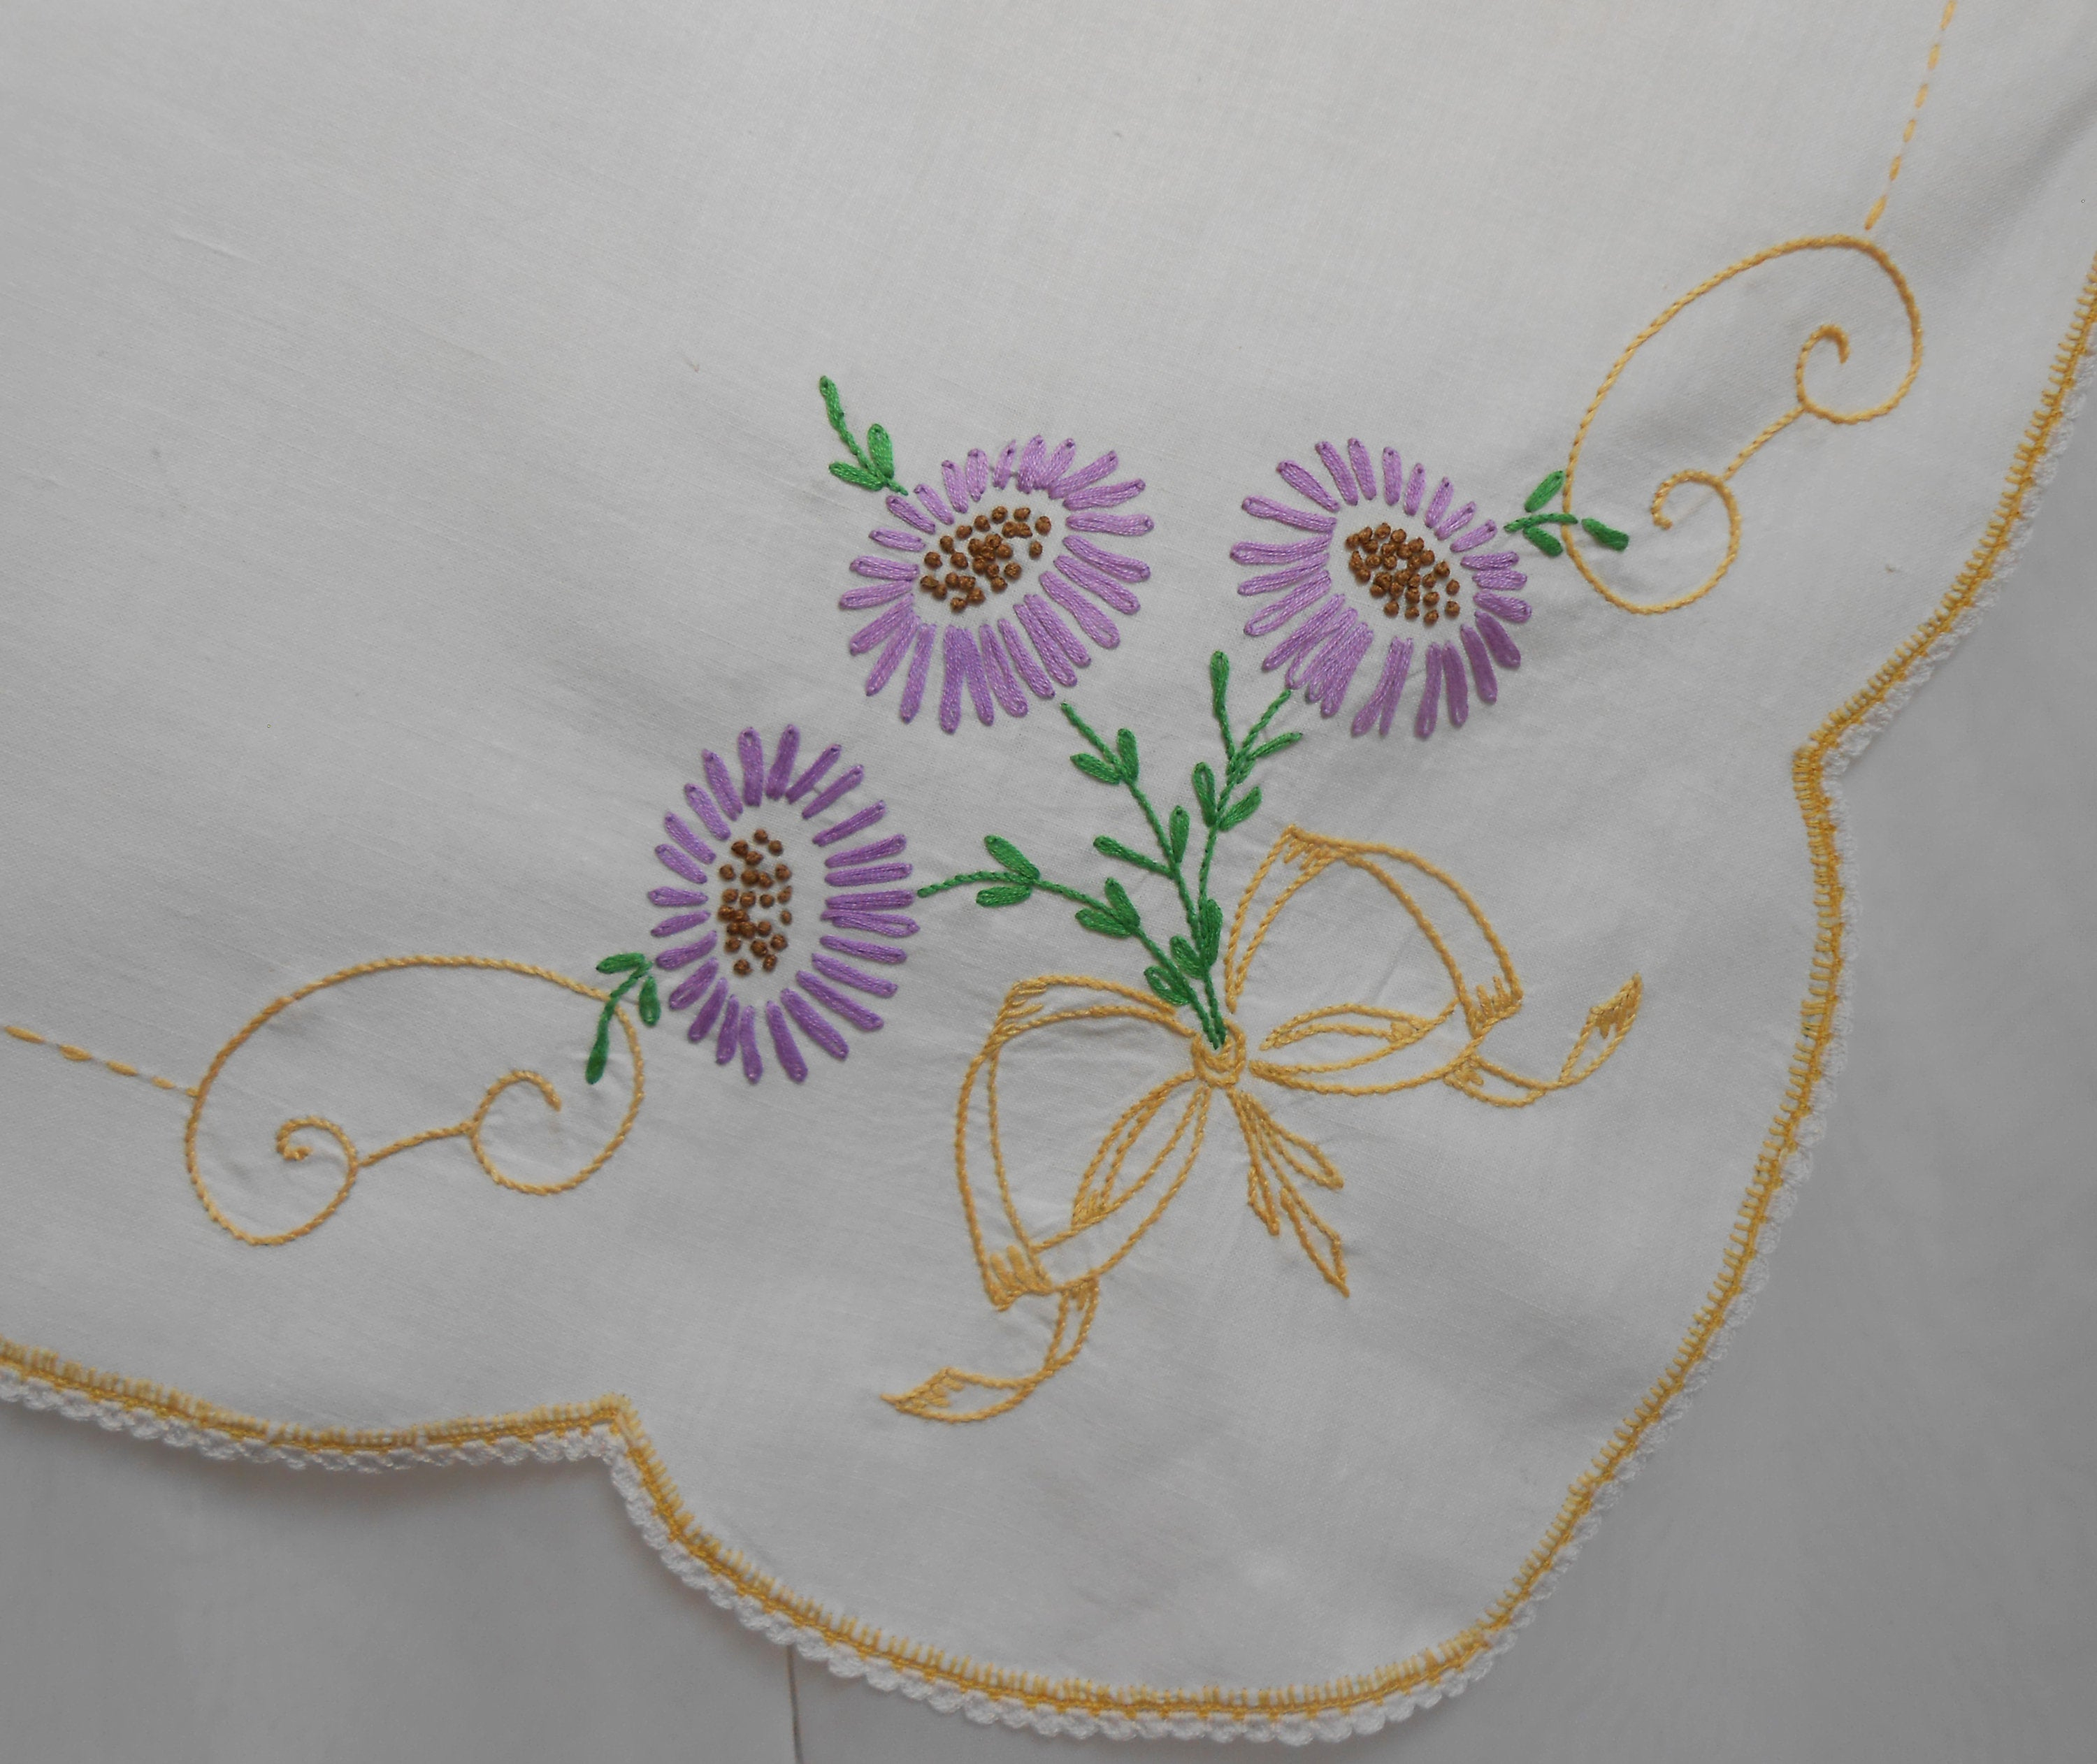 Hand Embroidery Patterns For Tablecloth Tablecloth Purple Gold Green Hand Embroidery Vintage White Cotton Table Topper Hand Crochet Lace Trim 32 X 3475 Holiday Party Bright Color